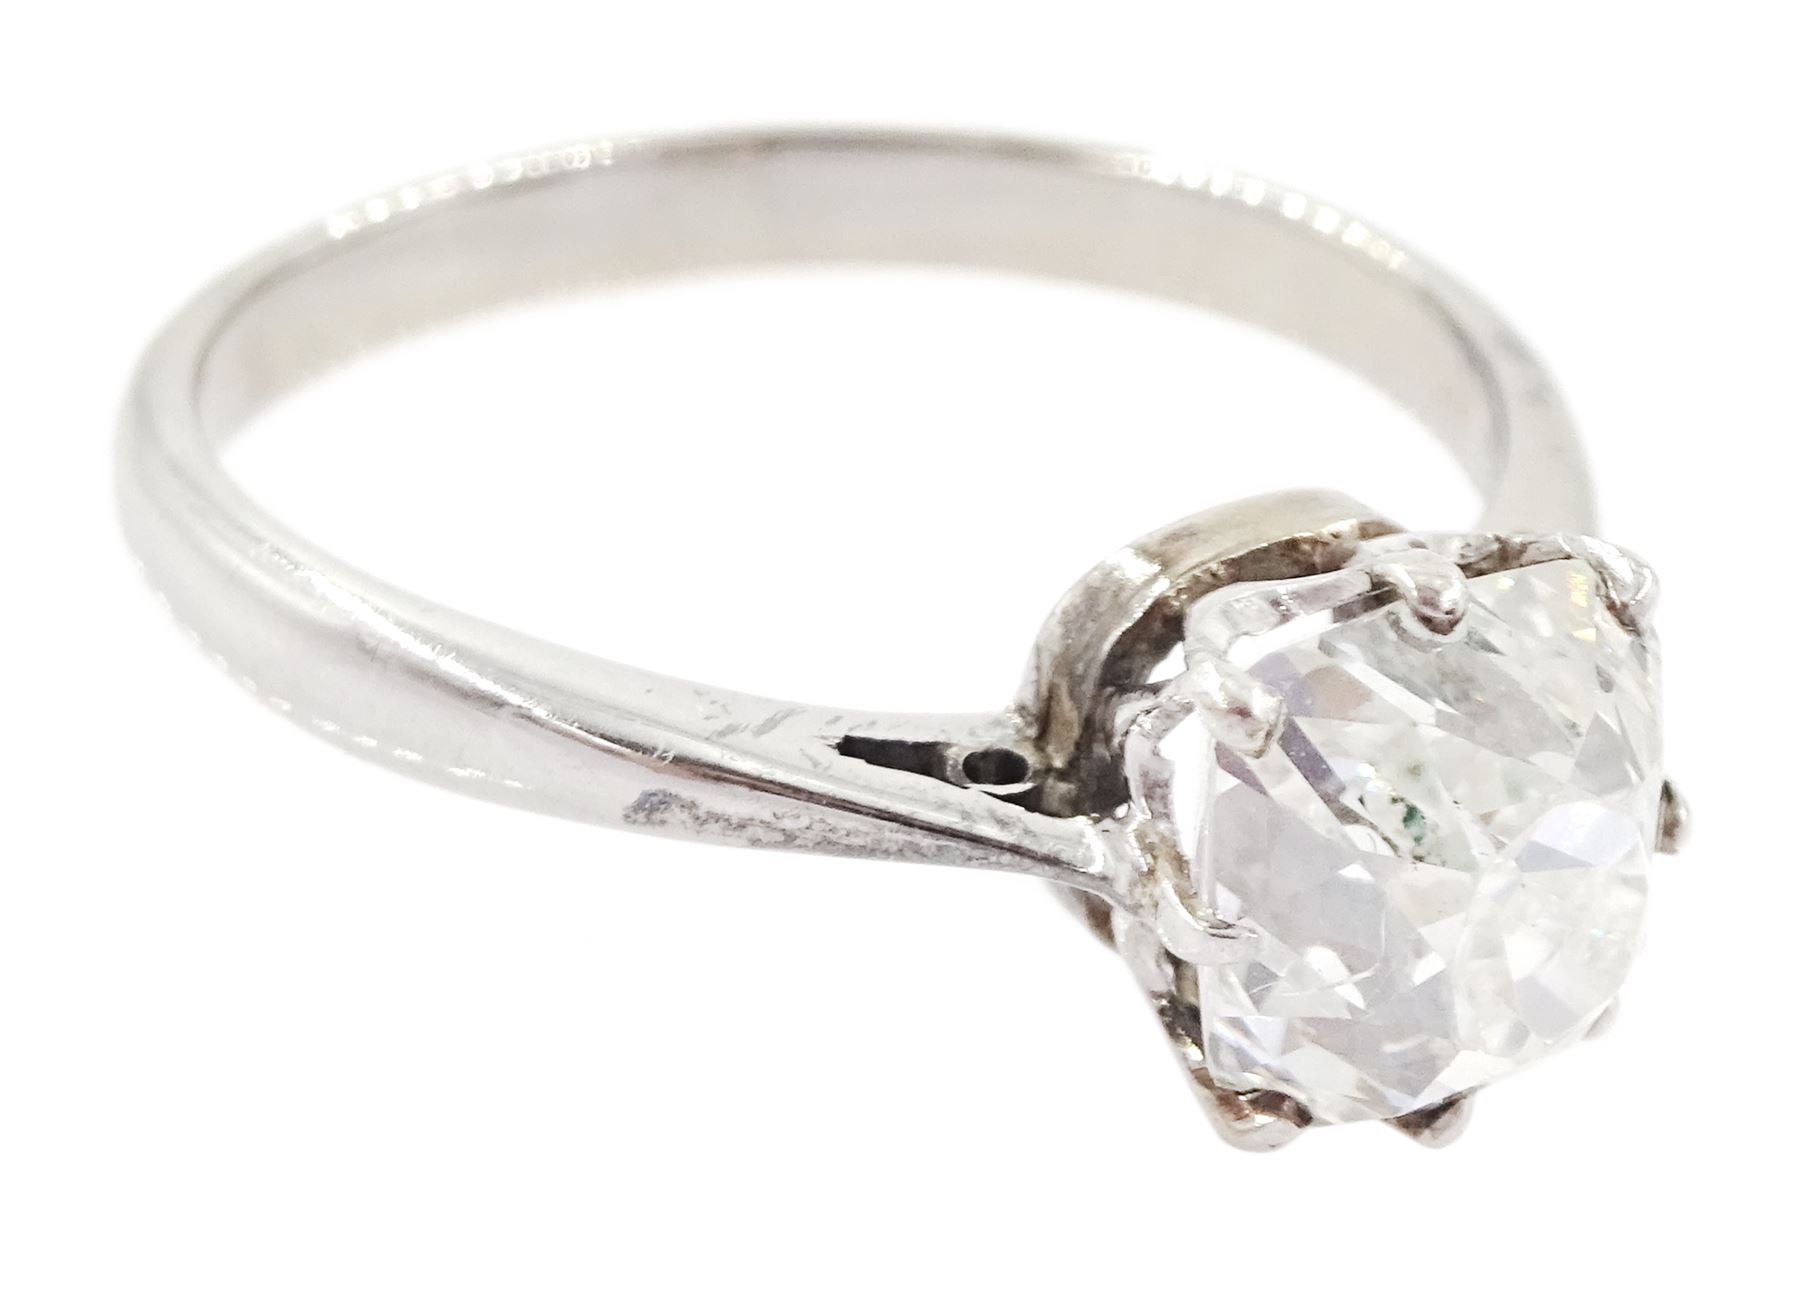 Early 20th century white gold and platinum single stone cushion cut diamond ring - Image 3 of 4